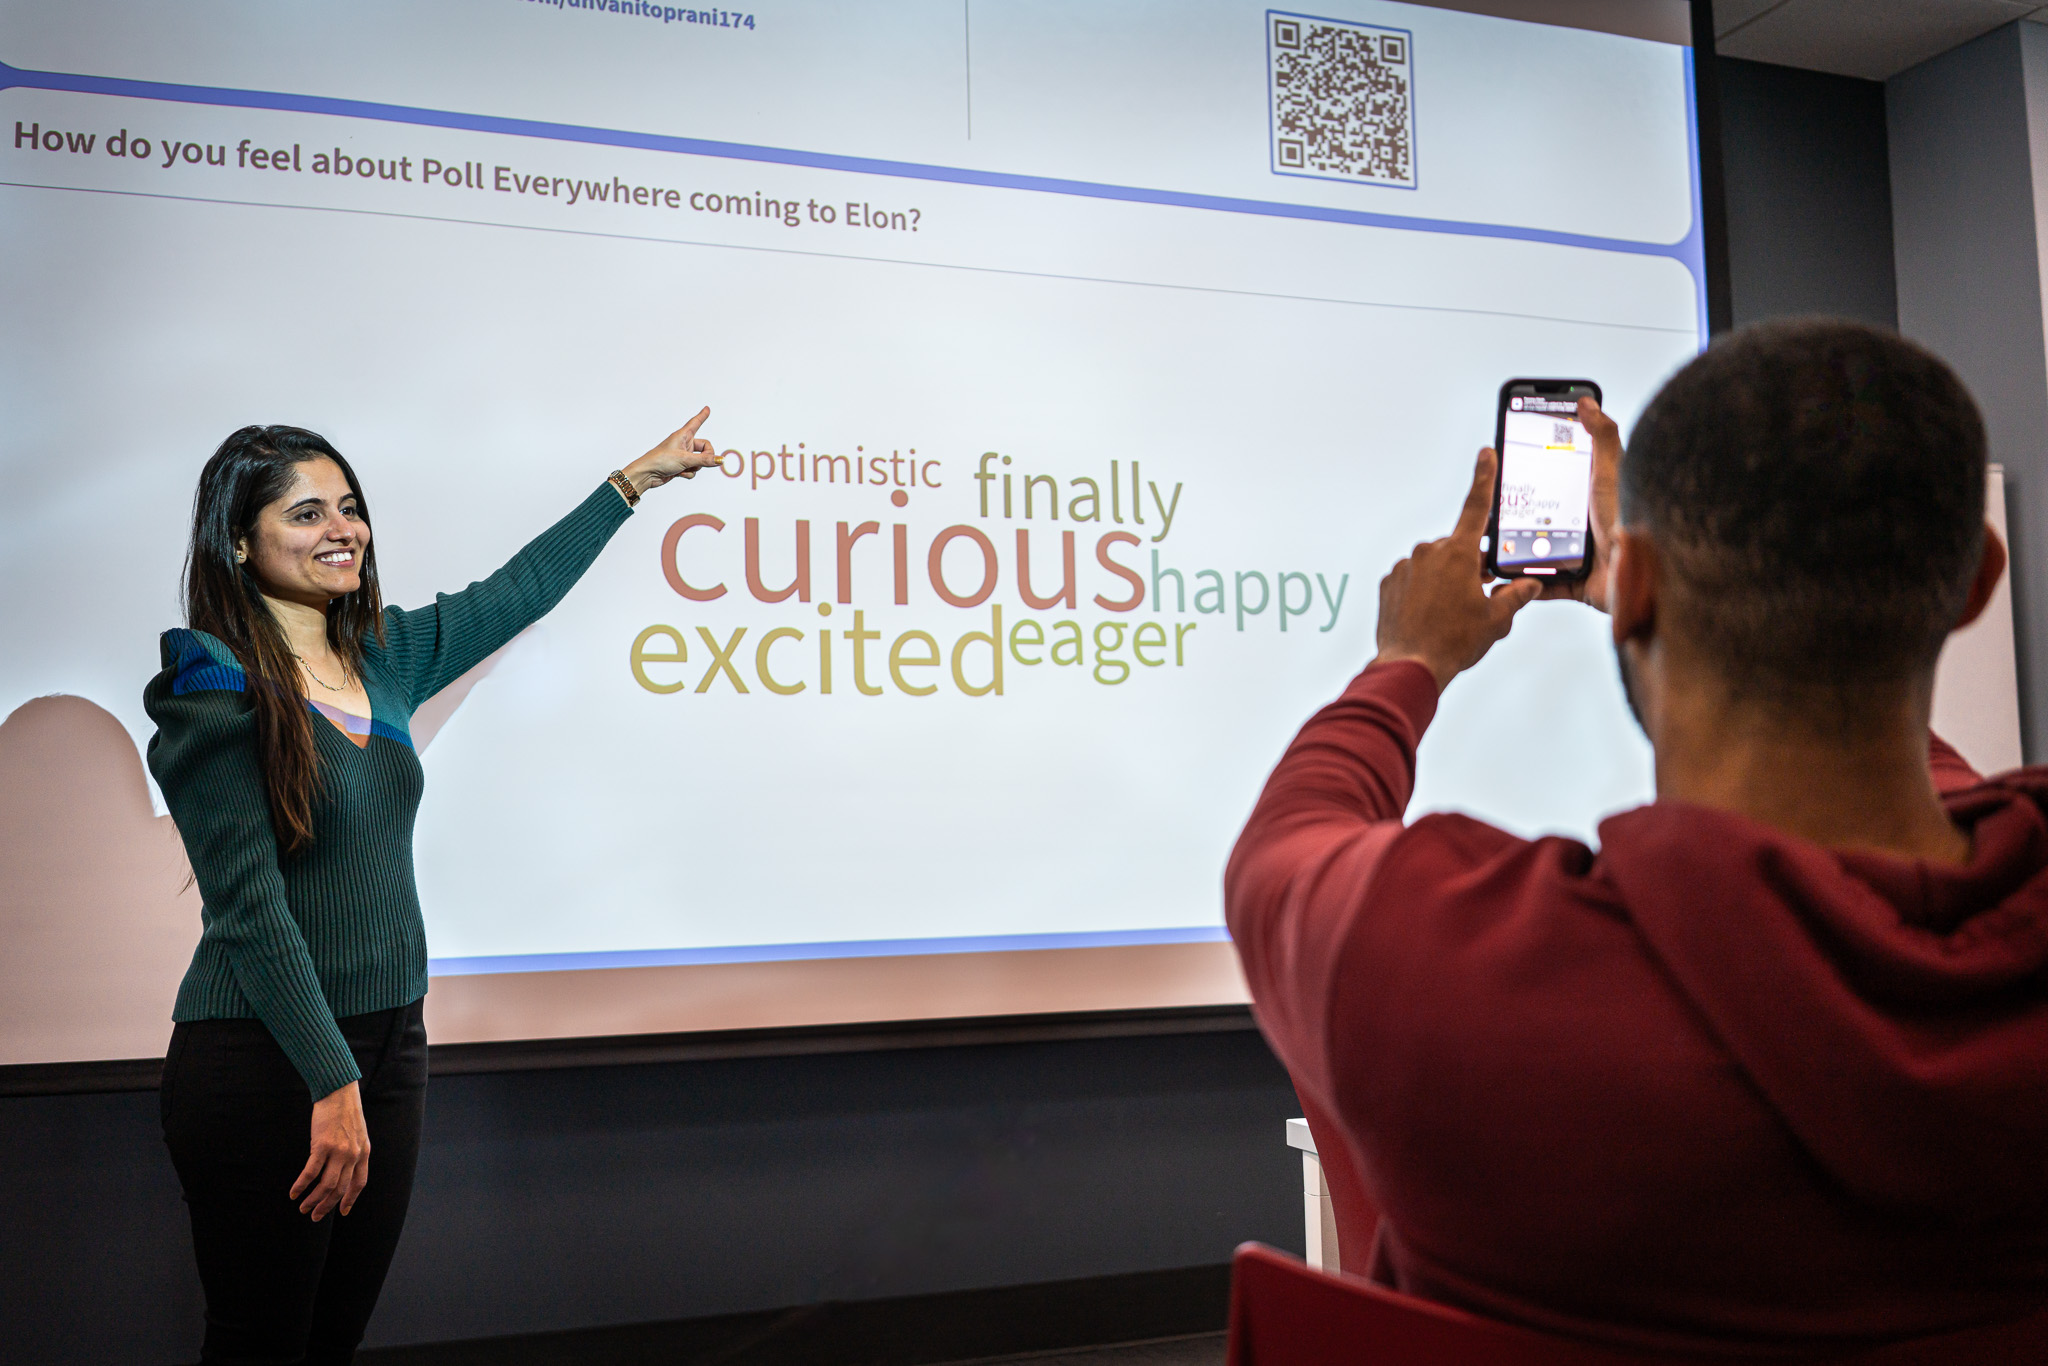 Class instructor with black hair wearing a dark green v-neck sweater standing on the left points to QR Code on the upper right of projector screen while a student wearing an Elon red hoodie scans the QR code with their smartphone. In the middle of the projector screen is a word cloud reading 